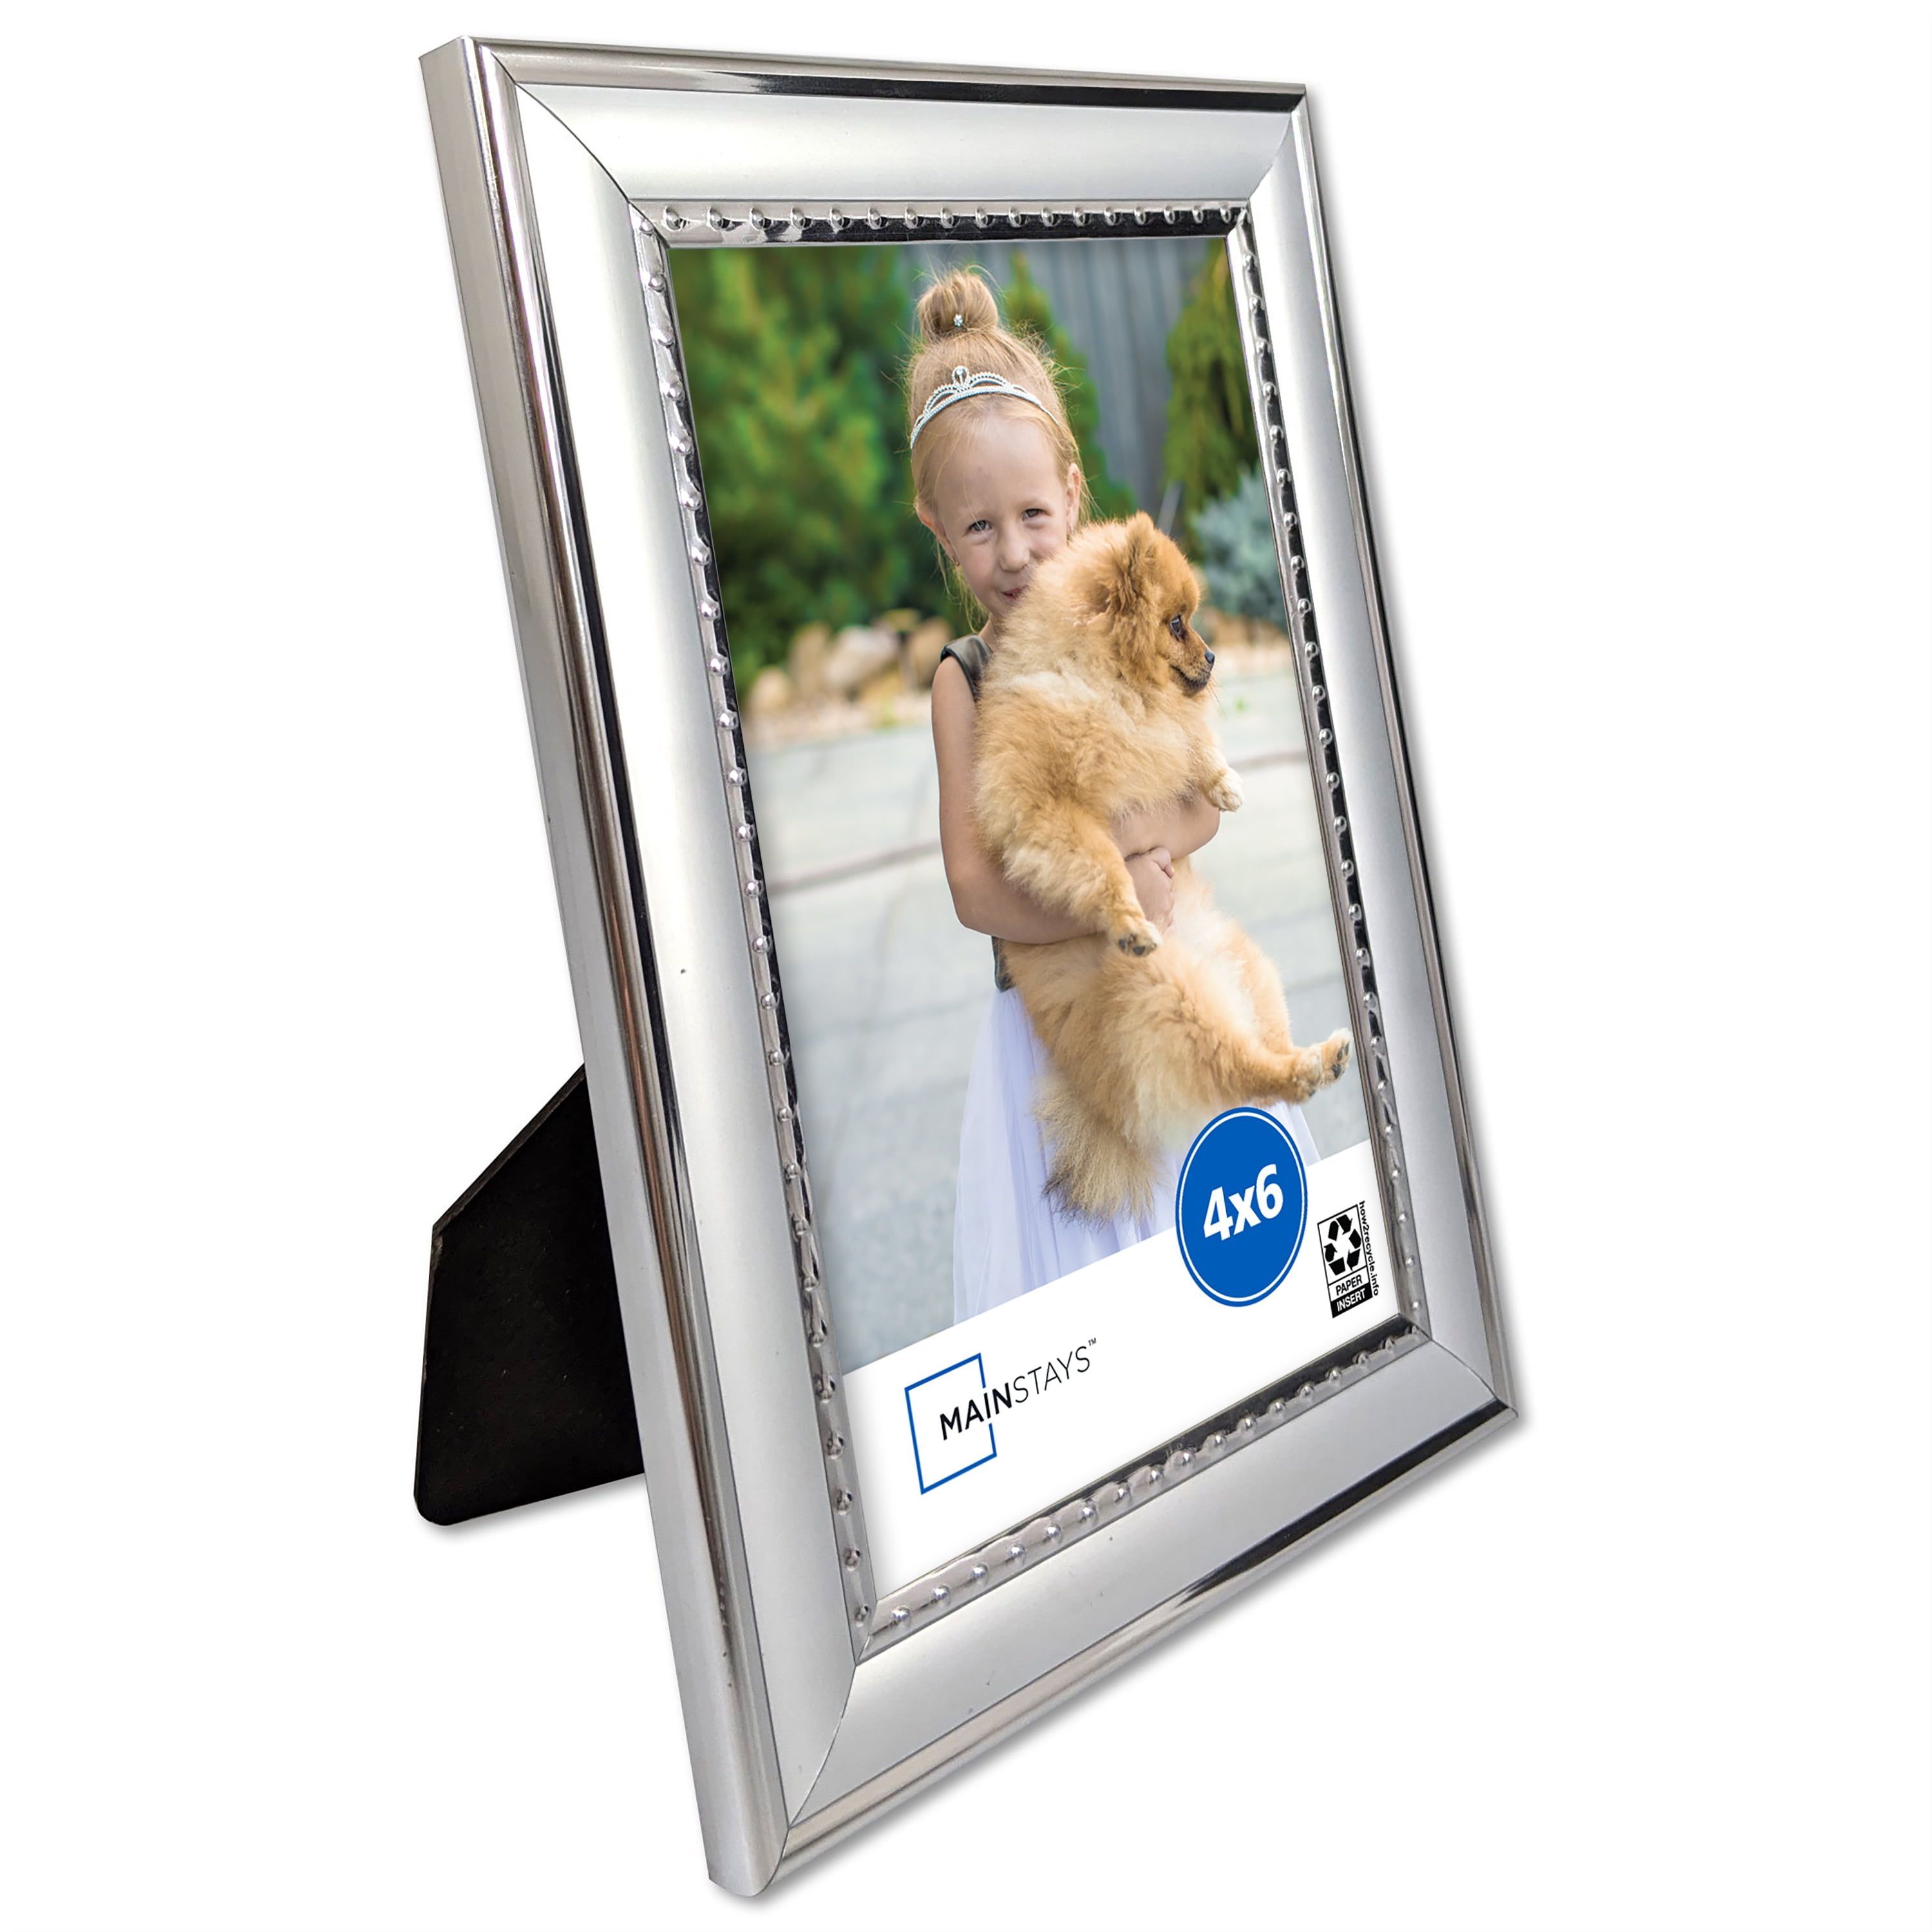 Silver 4 Photo Multi Picture Frame 4 x 6 Inch Frames – Present